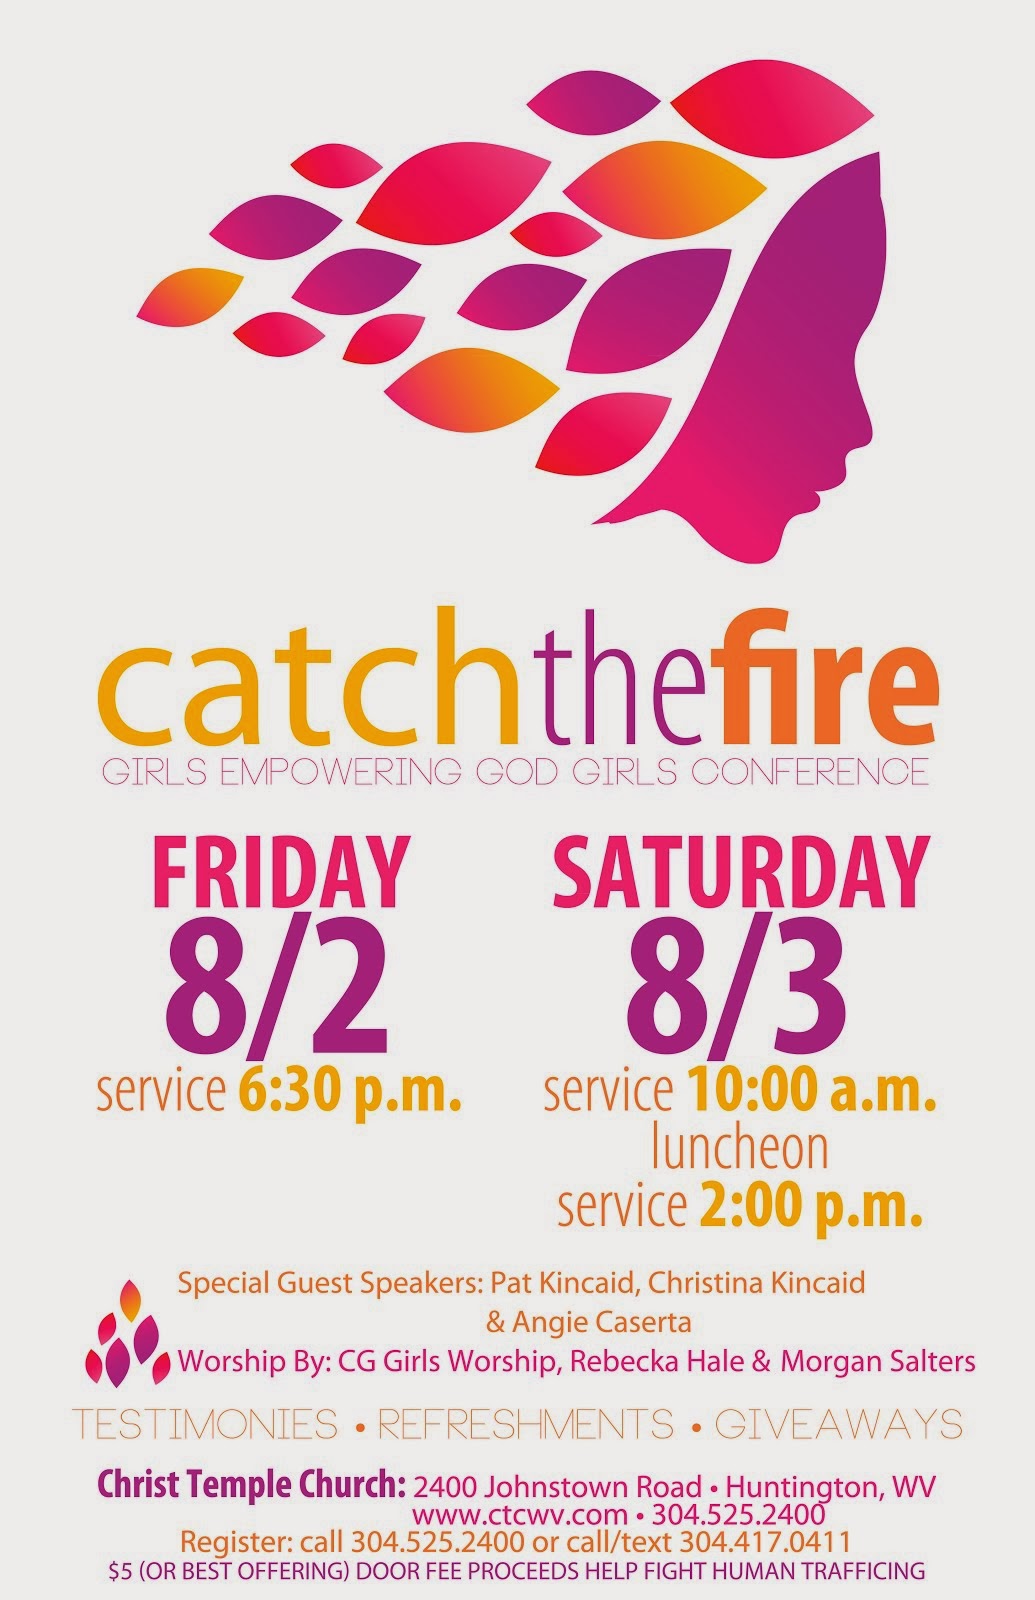 "Catch The Fire" GodGirl Conference